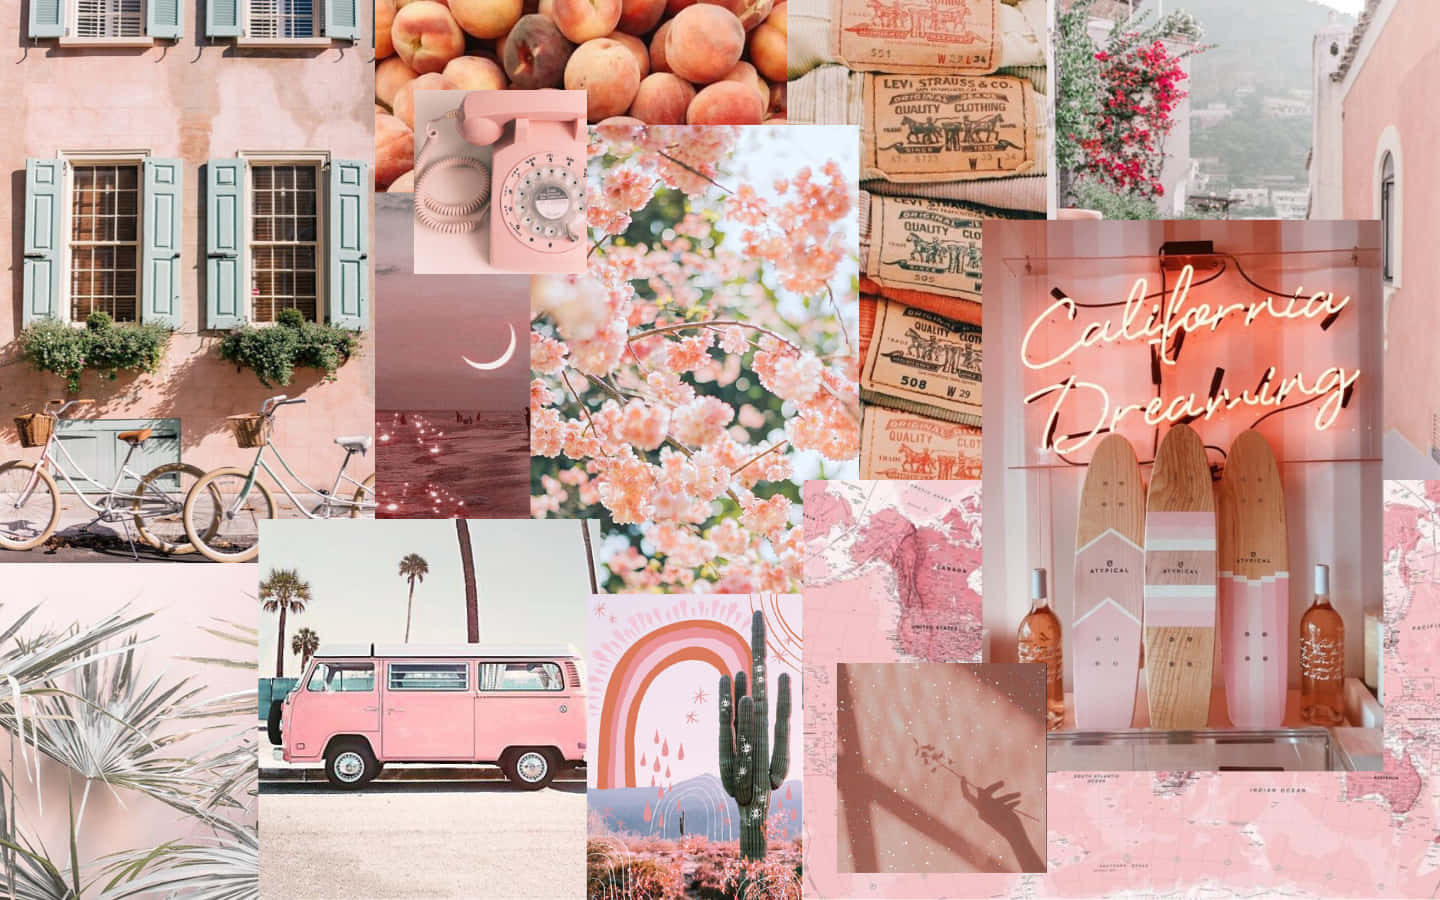 Download Pink Collage With A Pink Car And Flowers | Wallpapers.com